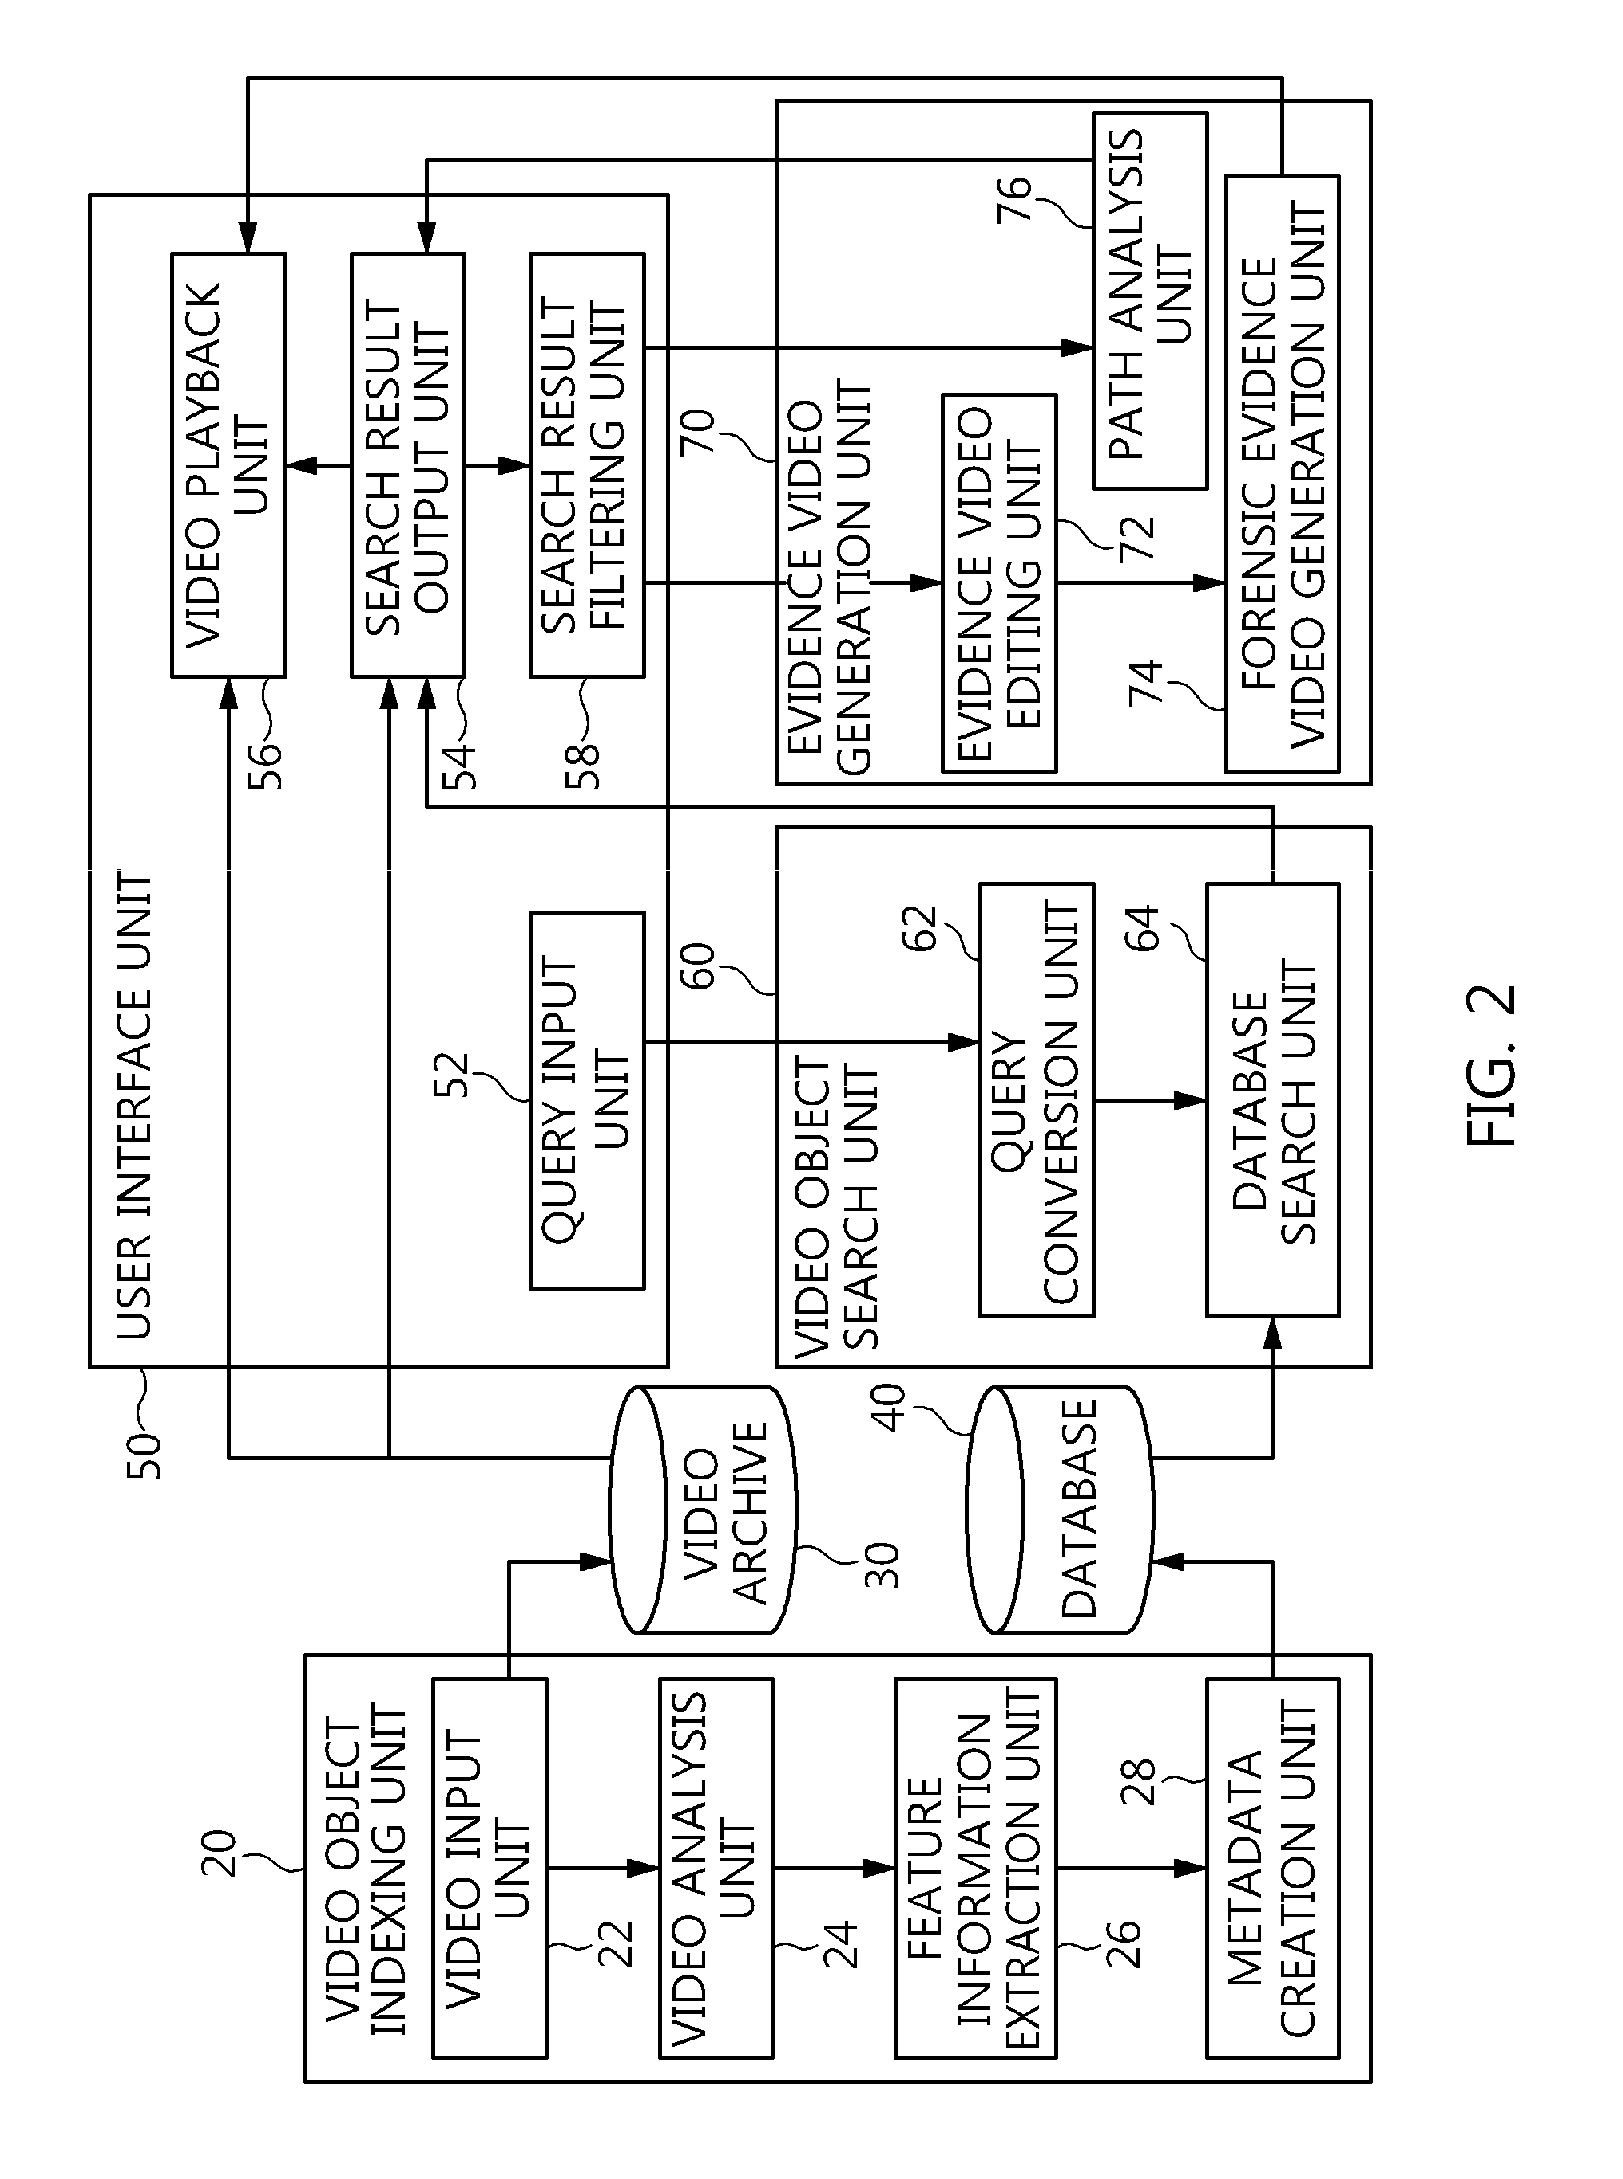 Apparatus and method for generating evidence video